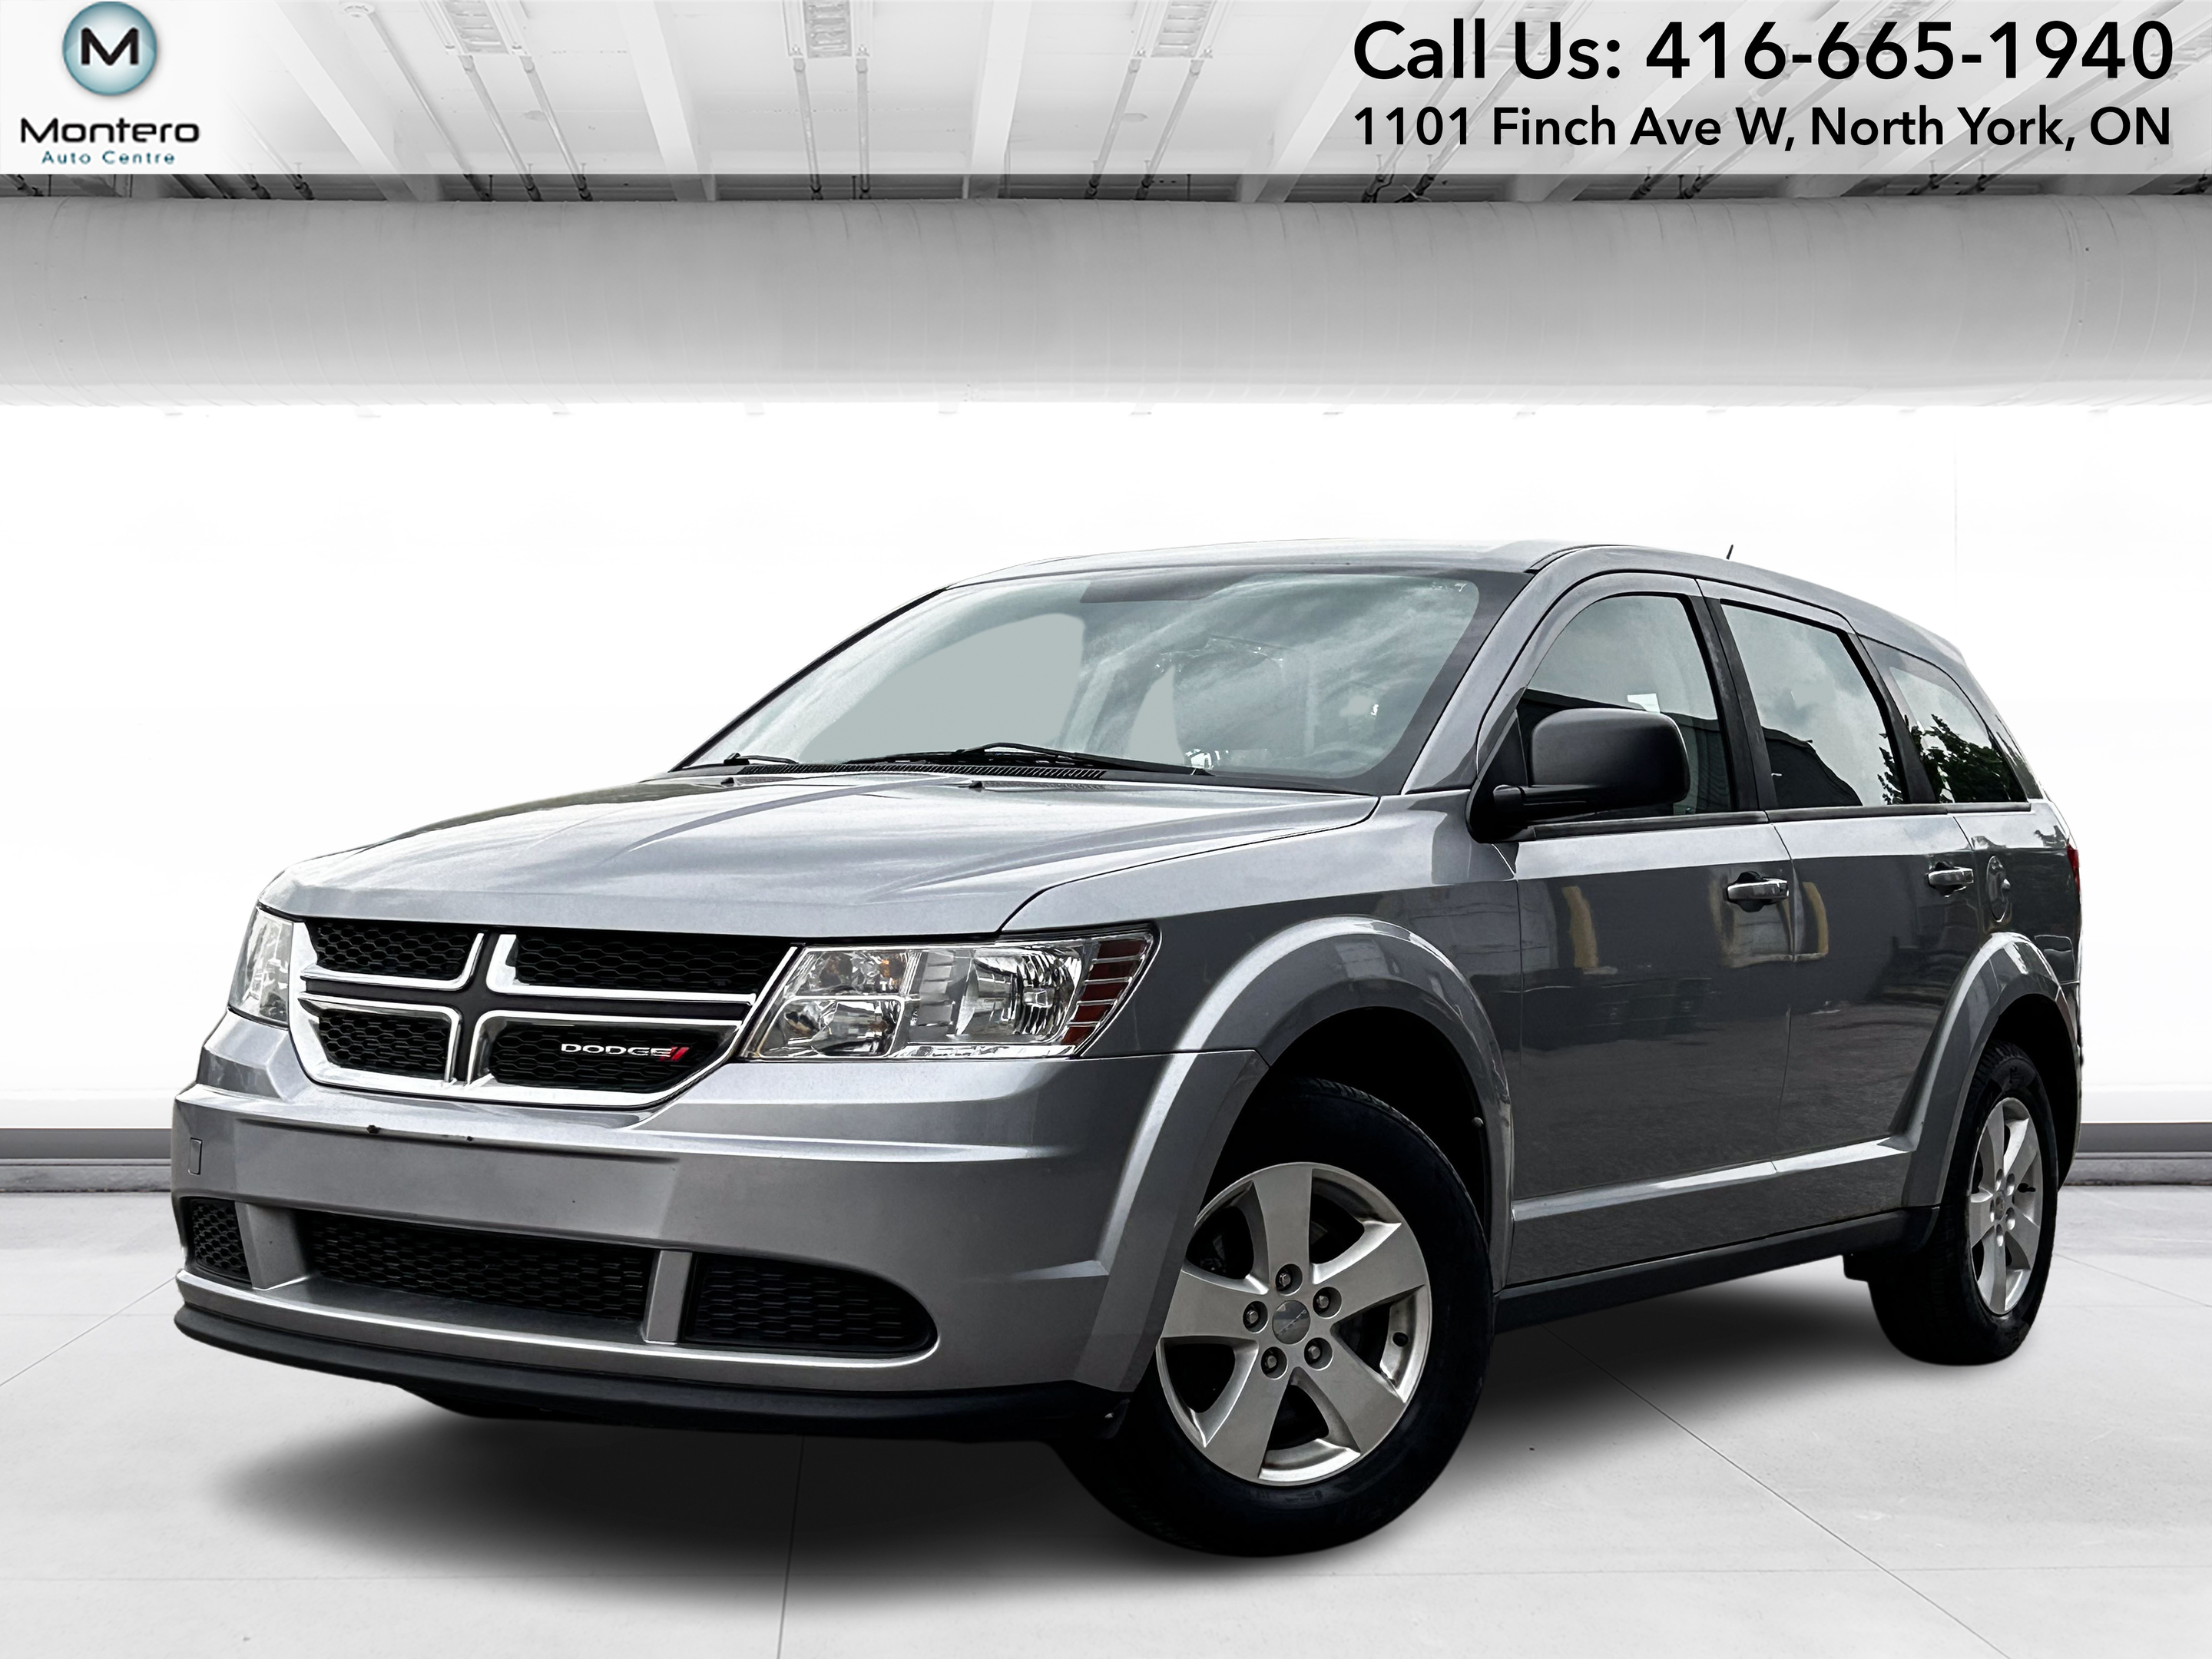 2016 Dodge Journey FAMILY VEHICLE 2.4L 4CYL 